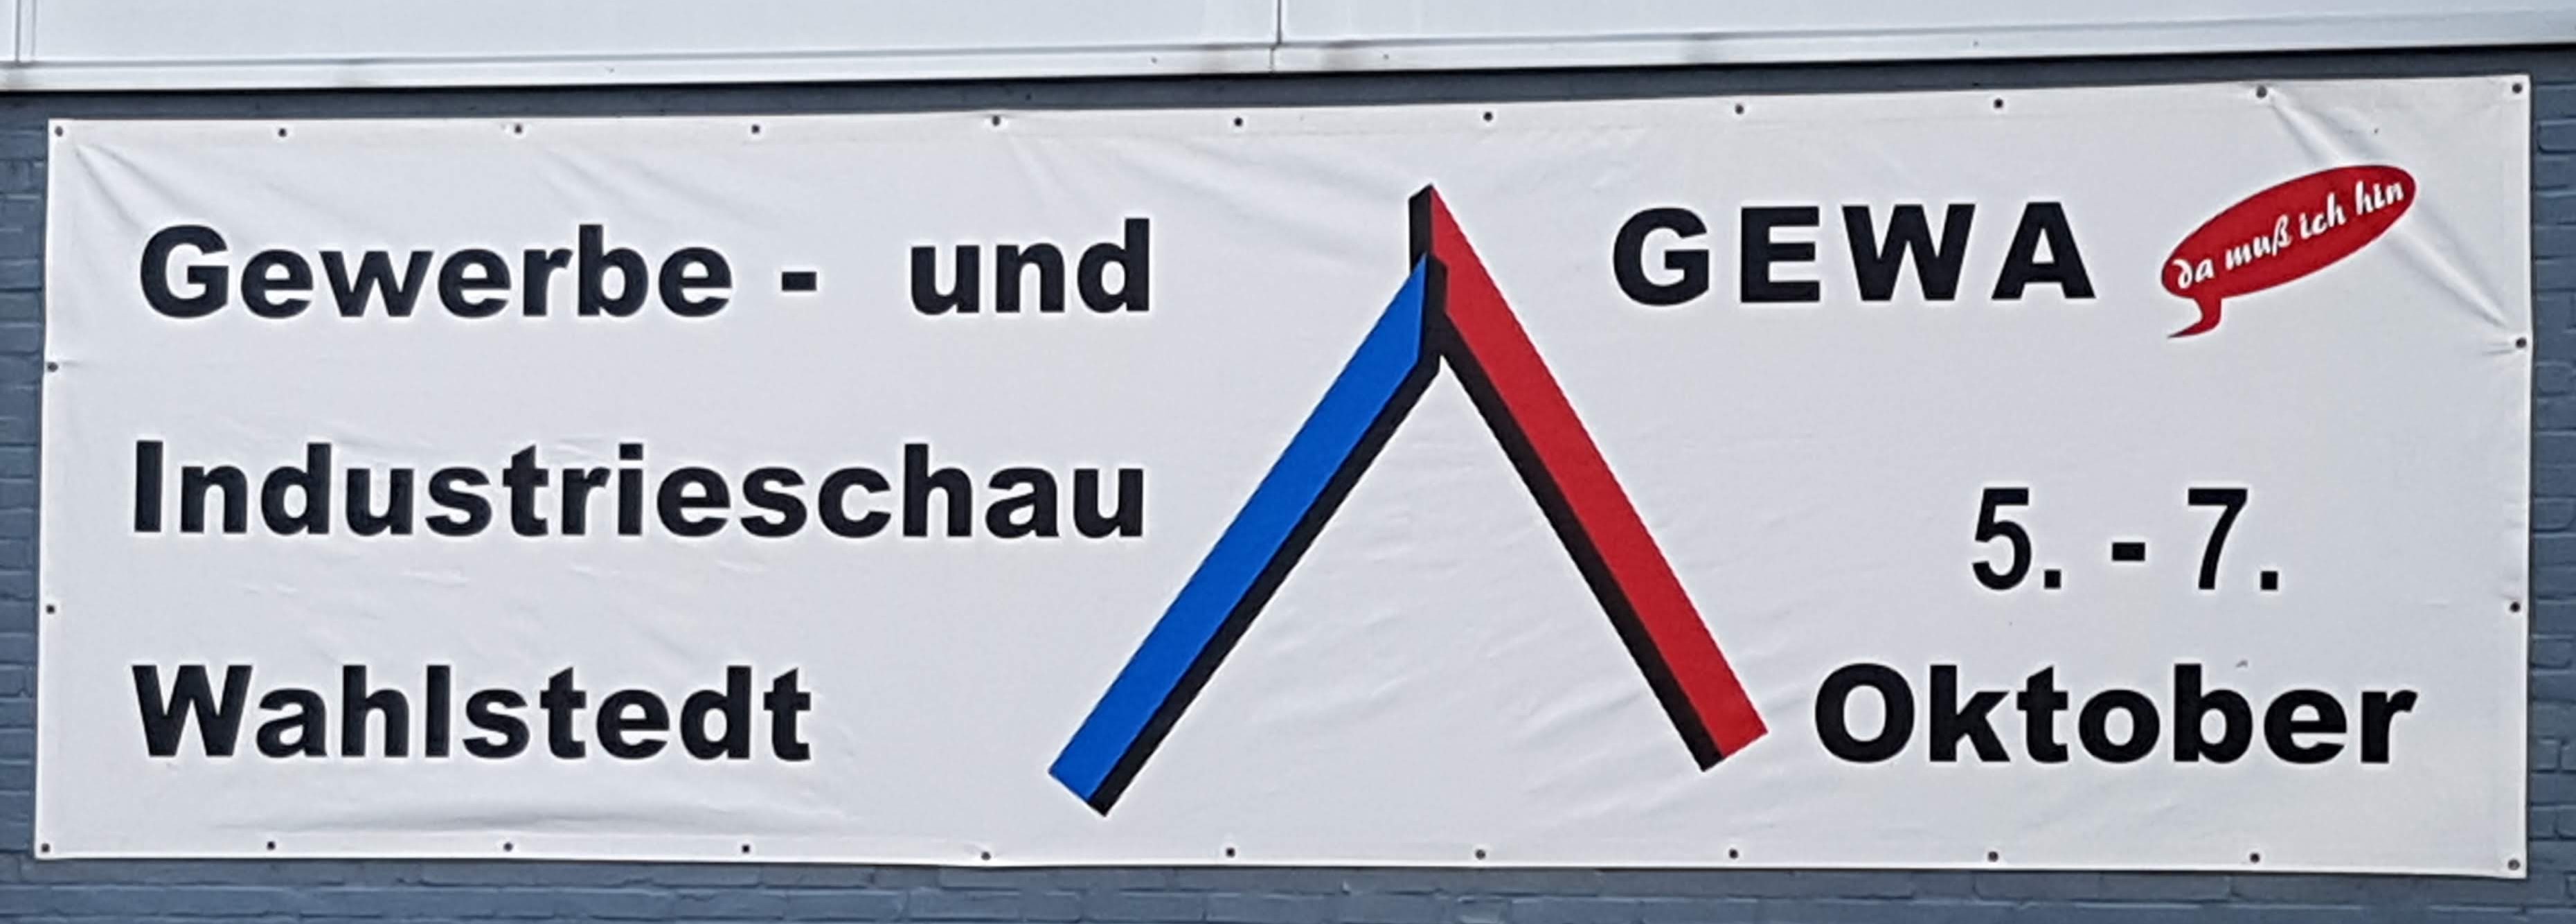 GEWA 2018 in Wahlstedt